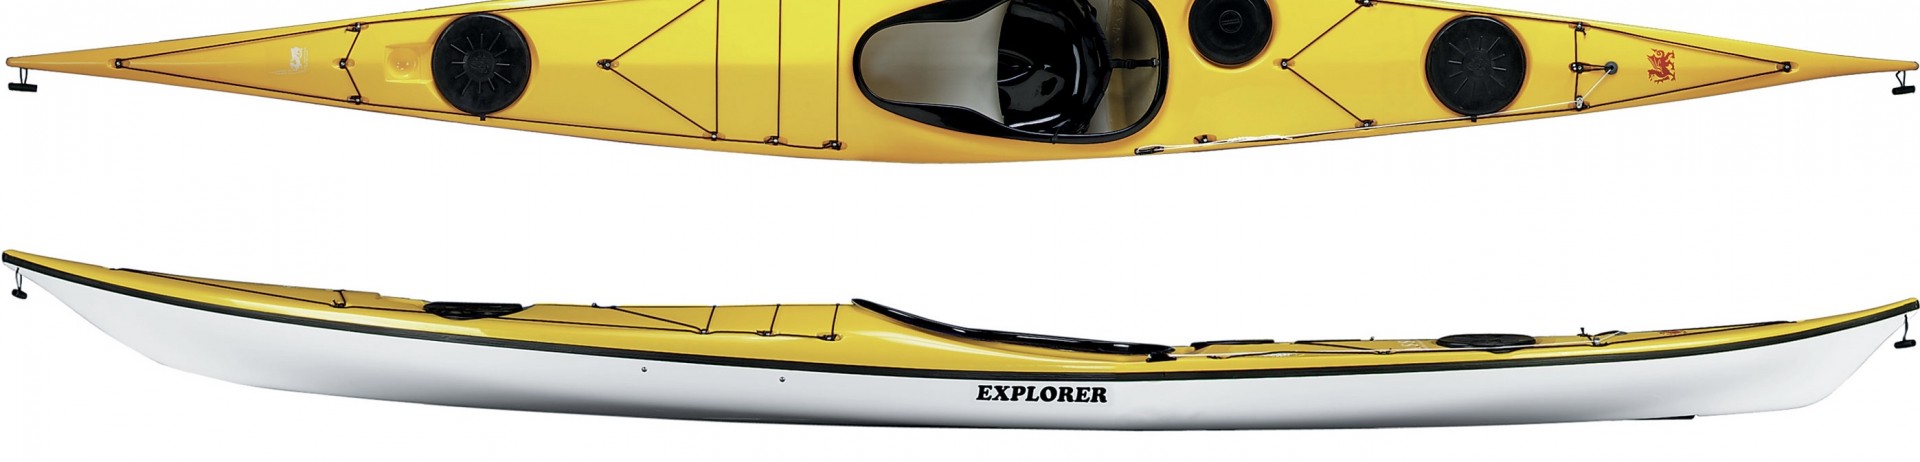 NDK Explorer Expedition Sea Kayak top and side views